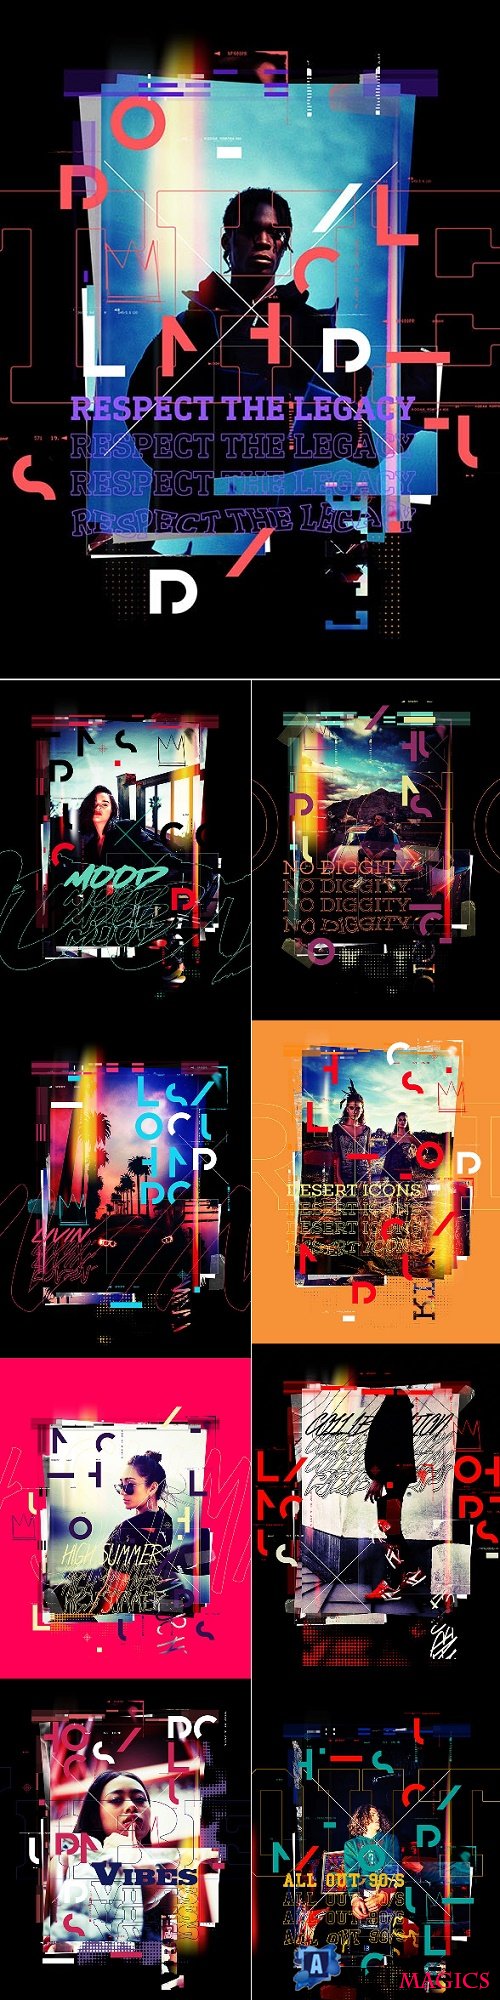 Lomography Typography Poster Photoshop Action - 24518011